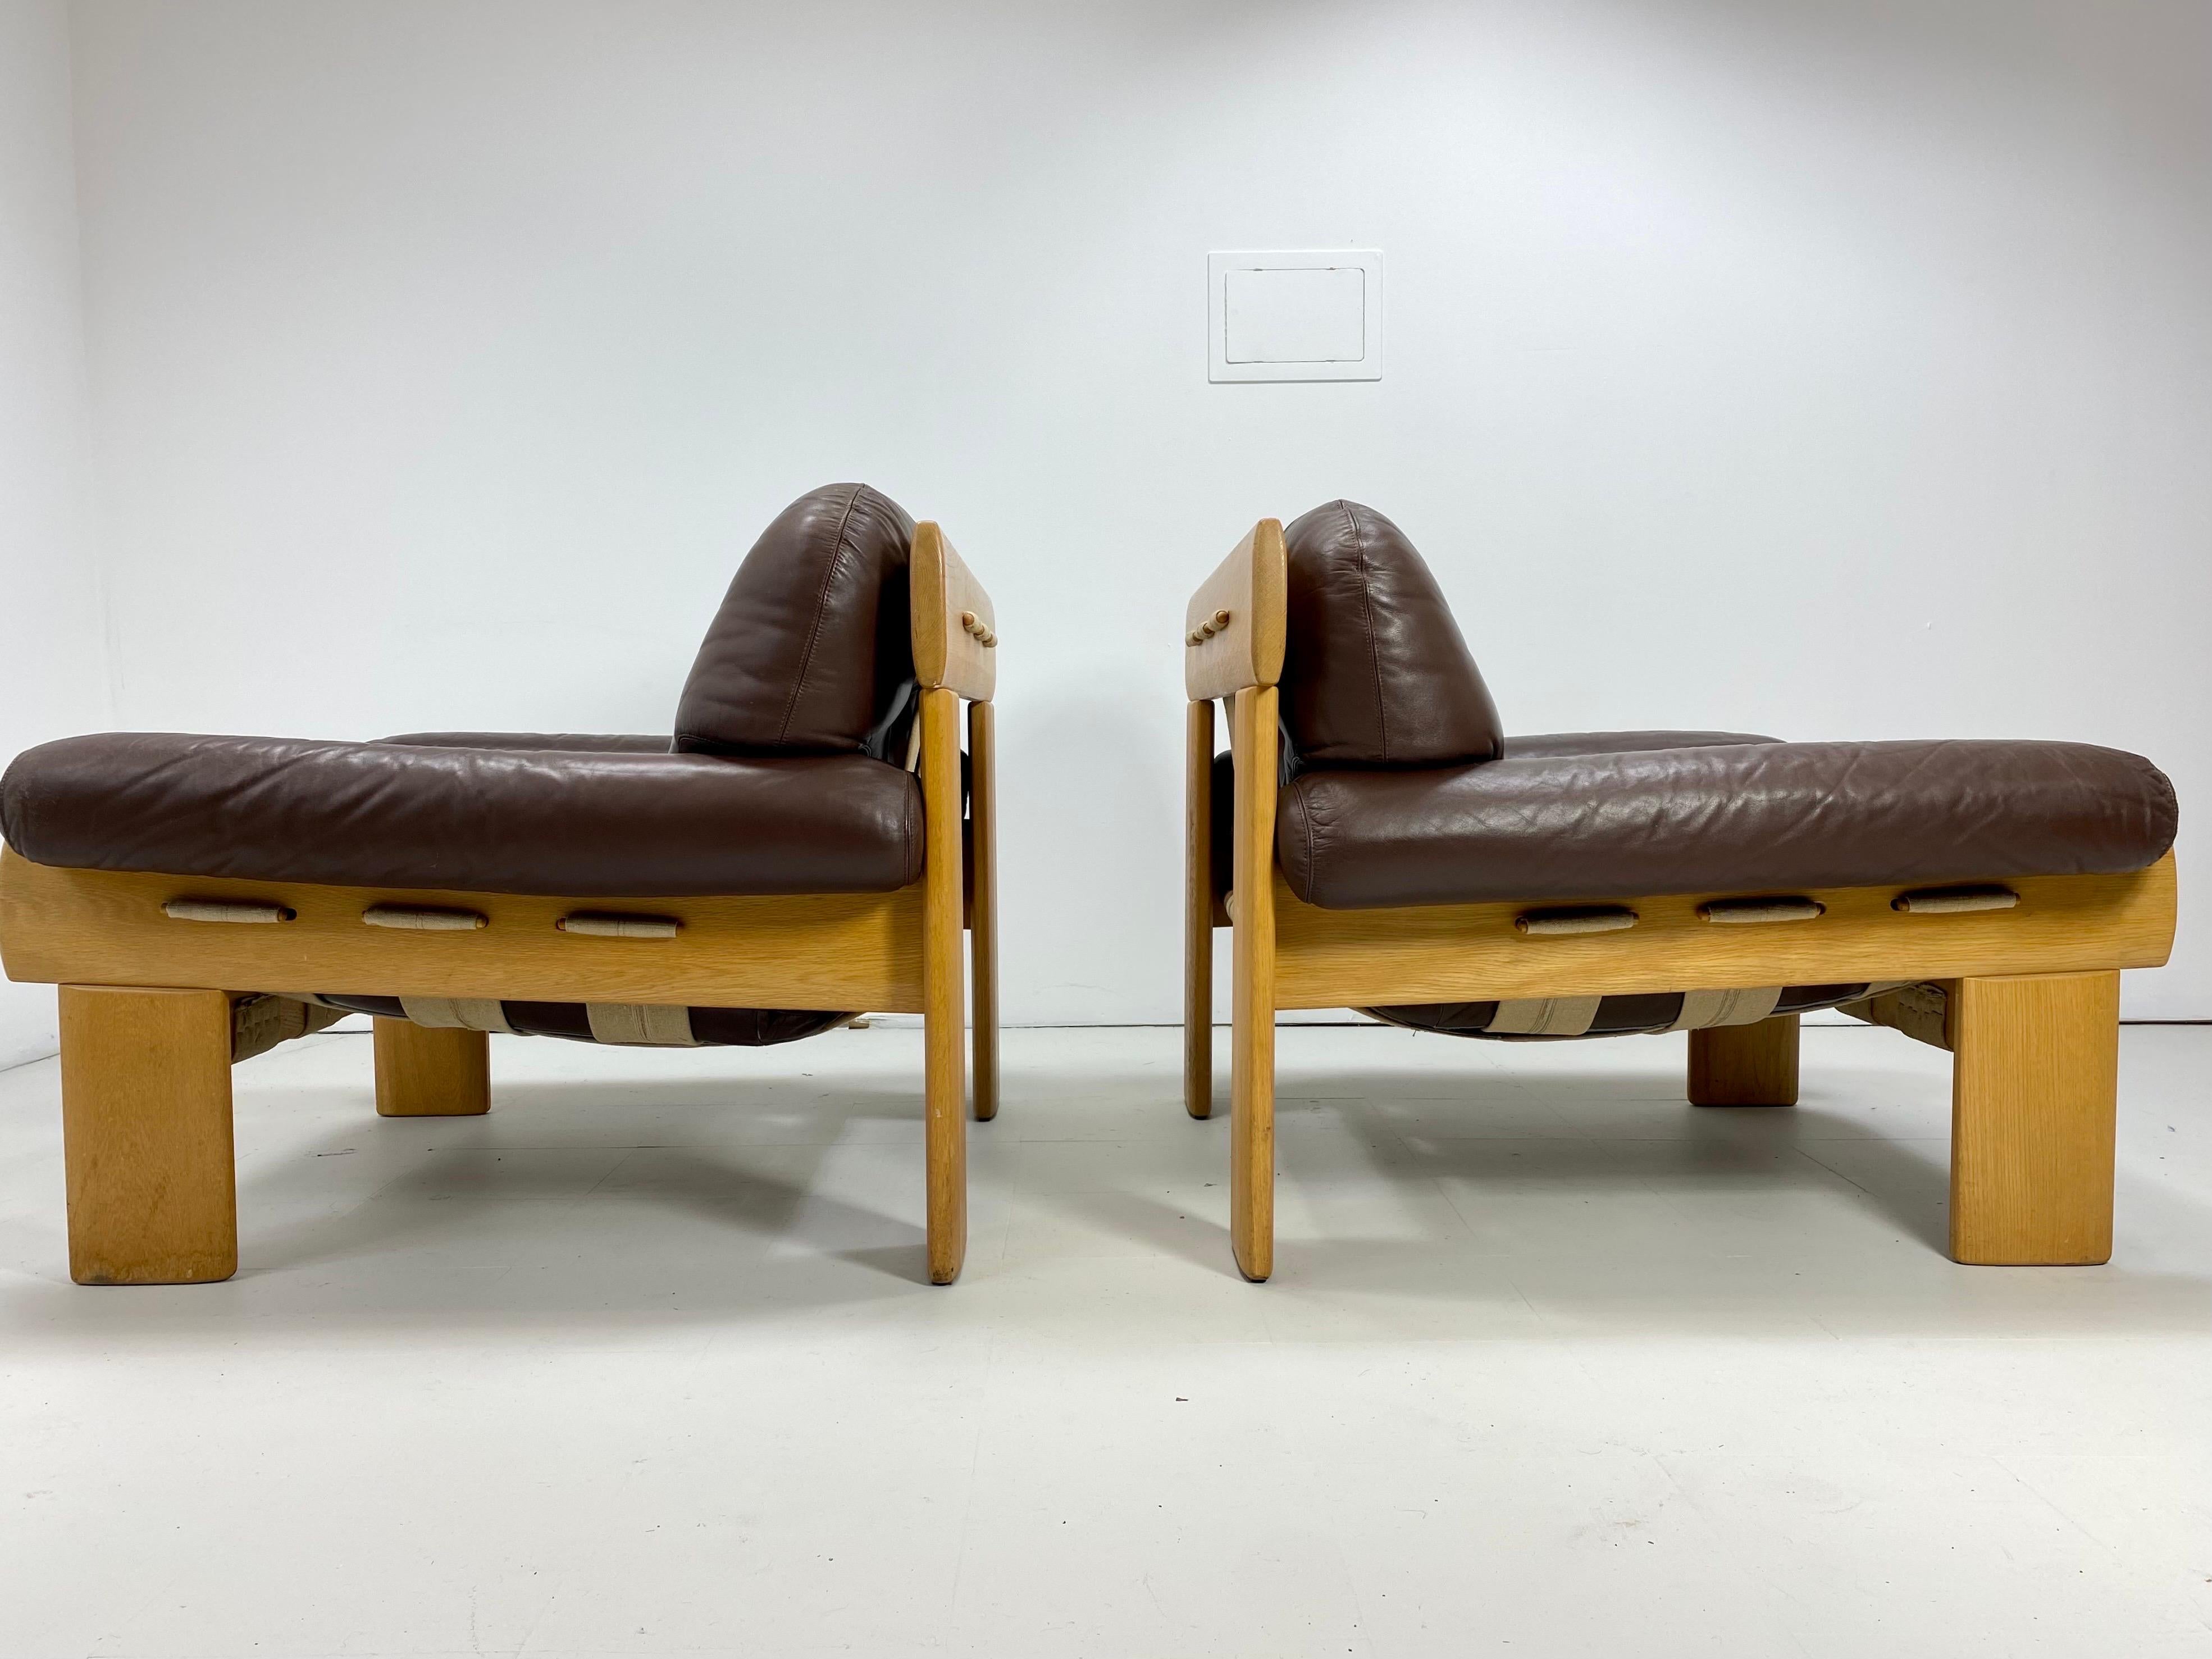 Pair of Esko Pajamies “Africa” chairs for Asko. Finland. Unique chairs made of oak, brown leather and wide canvas strapping. 1970’s

Delivery To NYC $425. Please inquire.